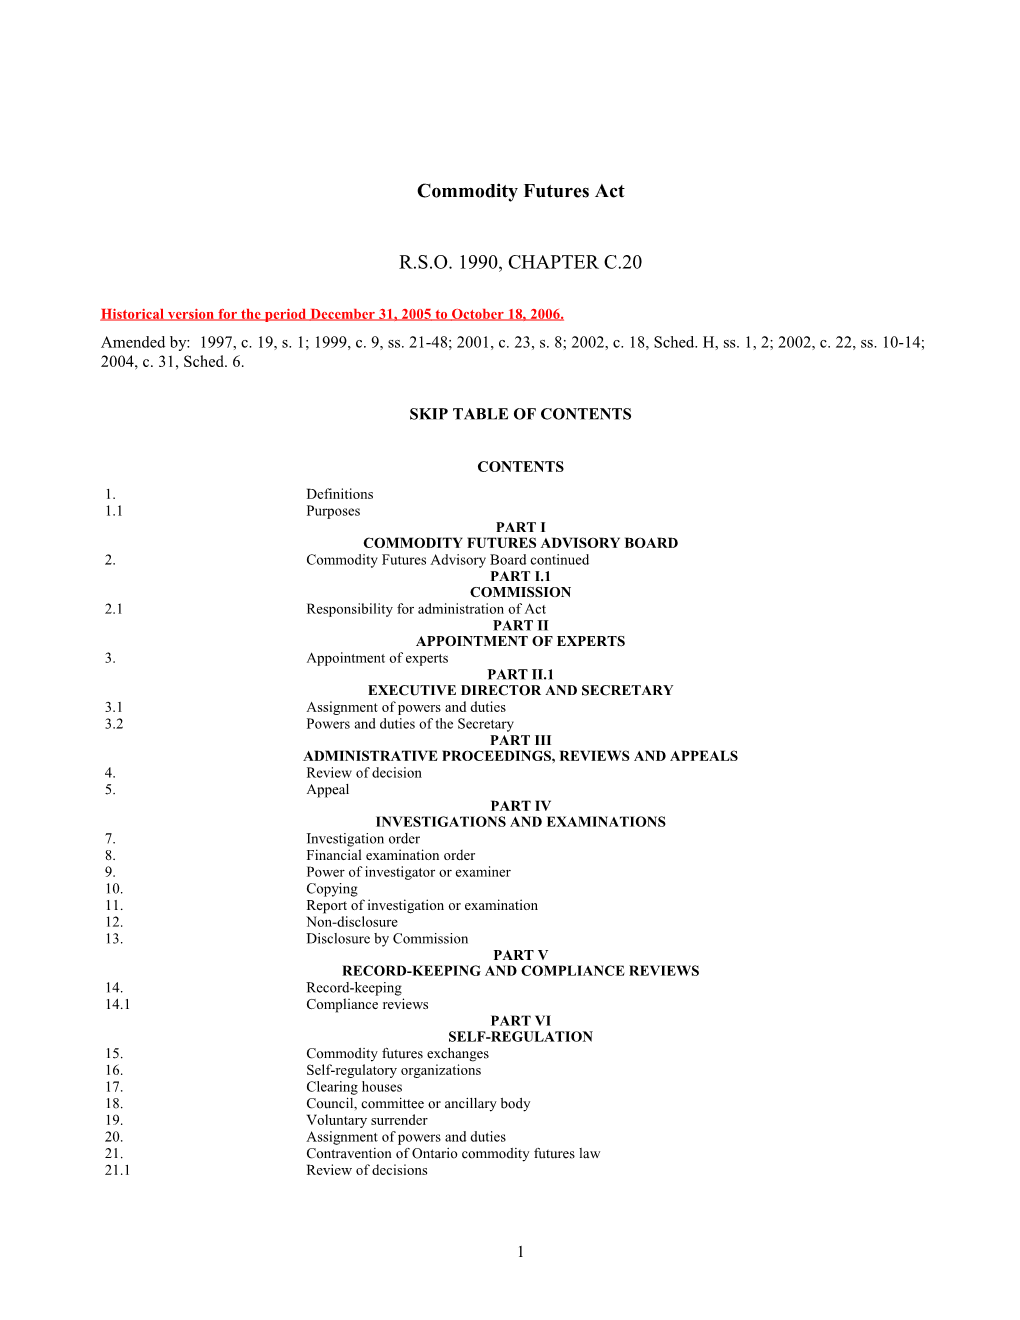 Commodity Futures Act, R.S.O. 1990, C. C.20